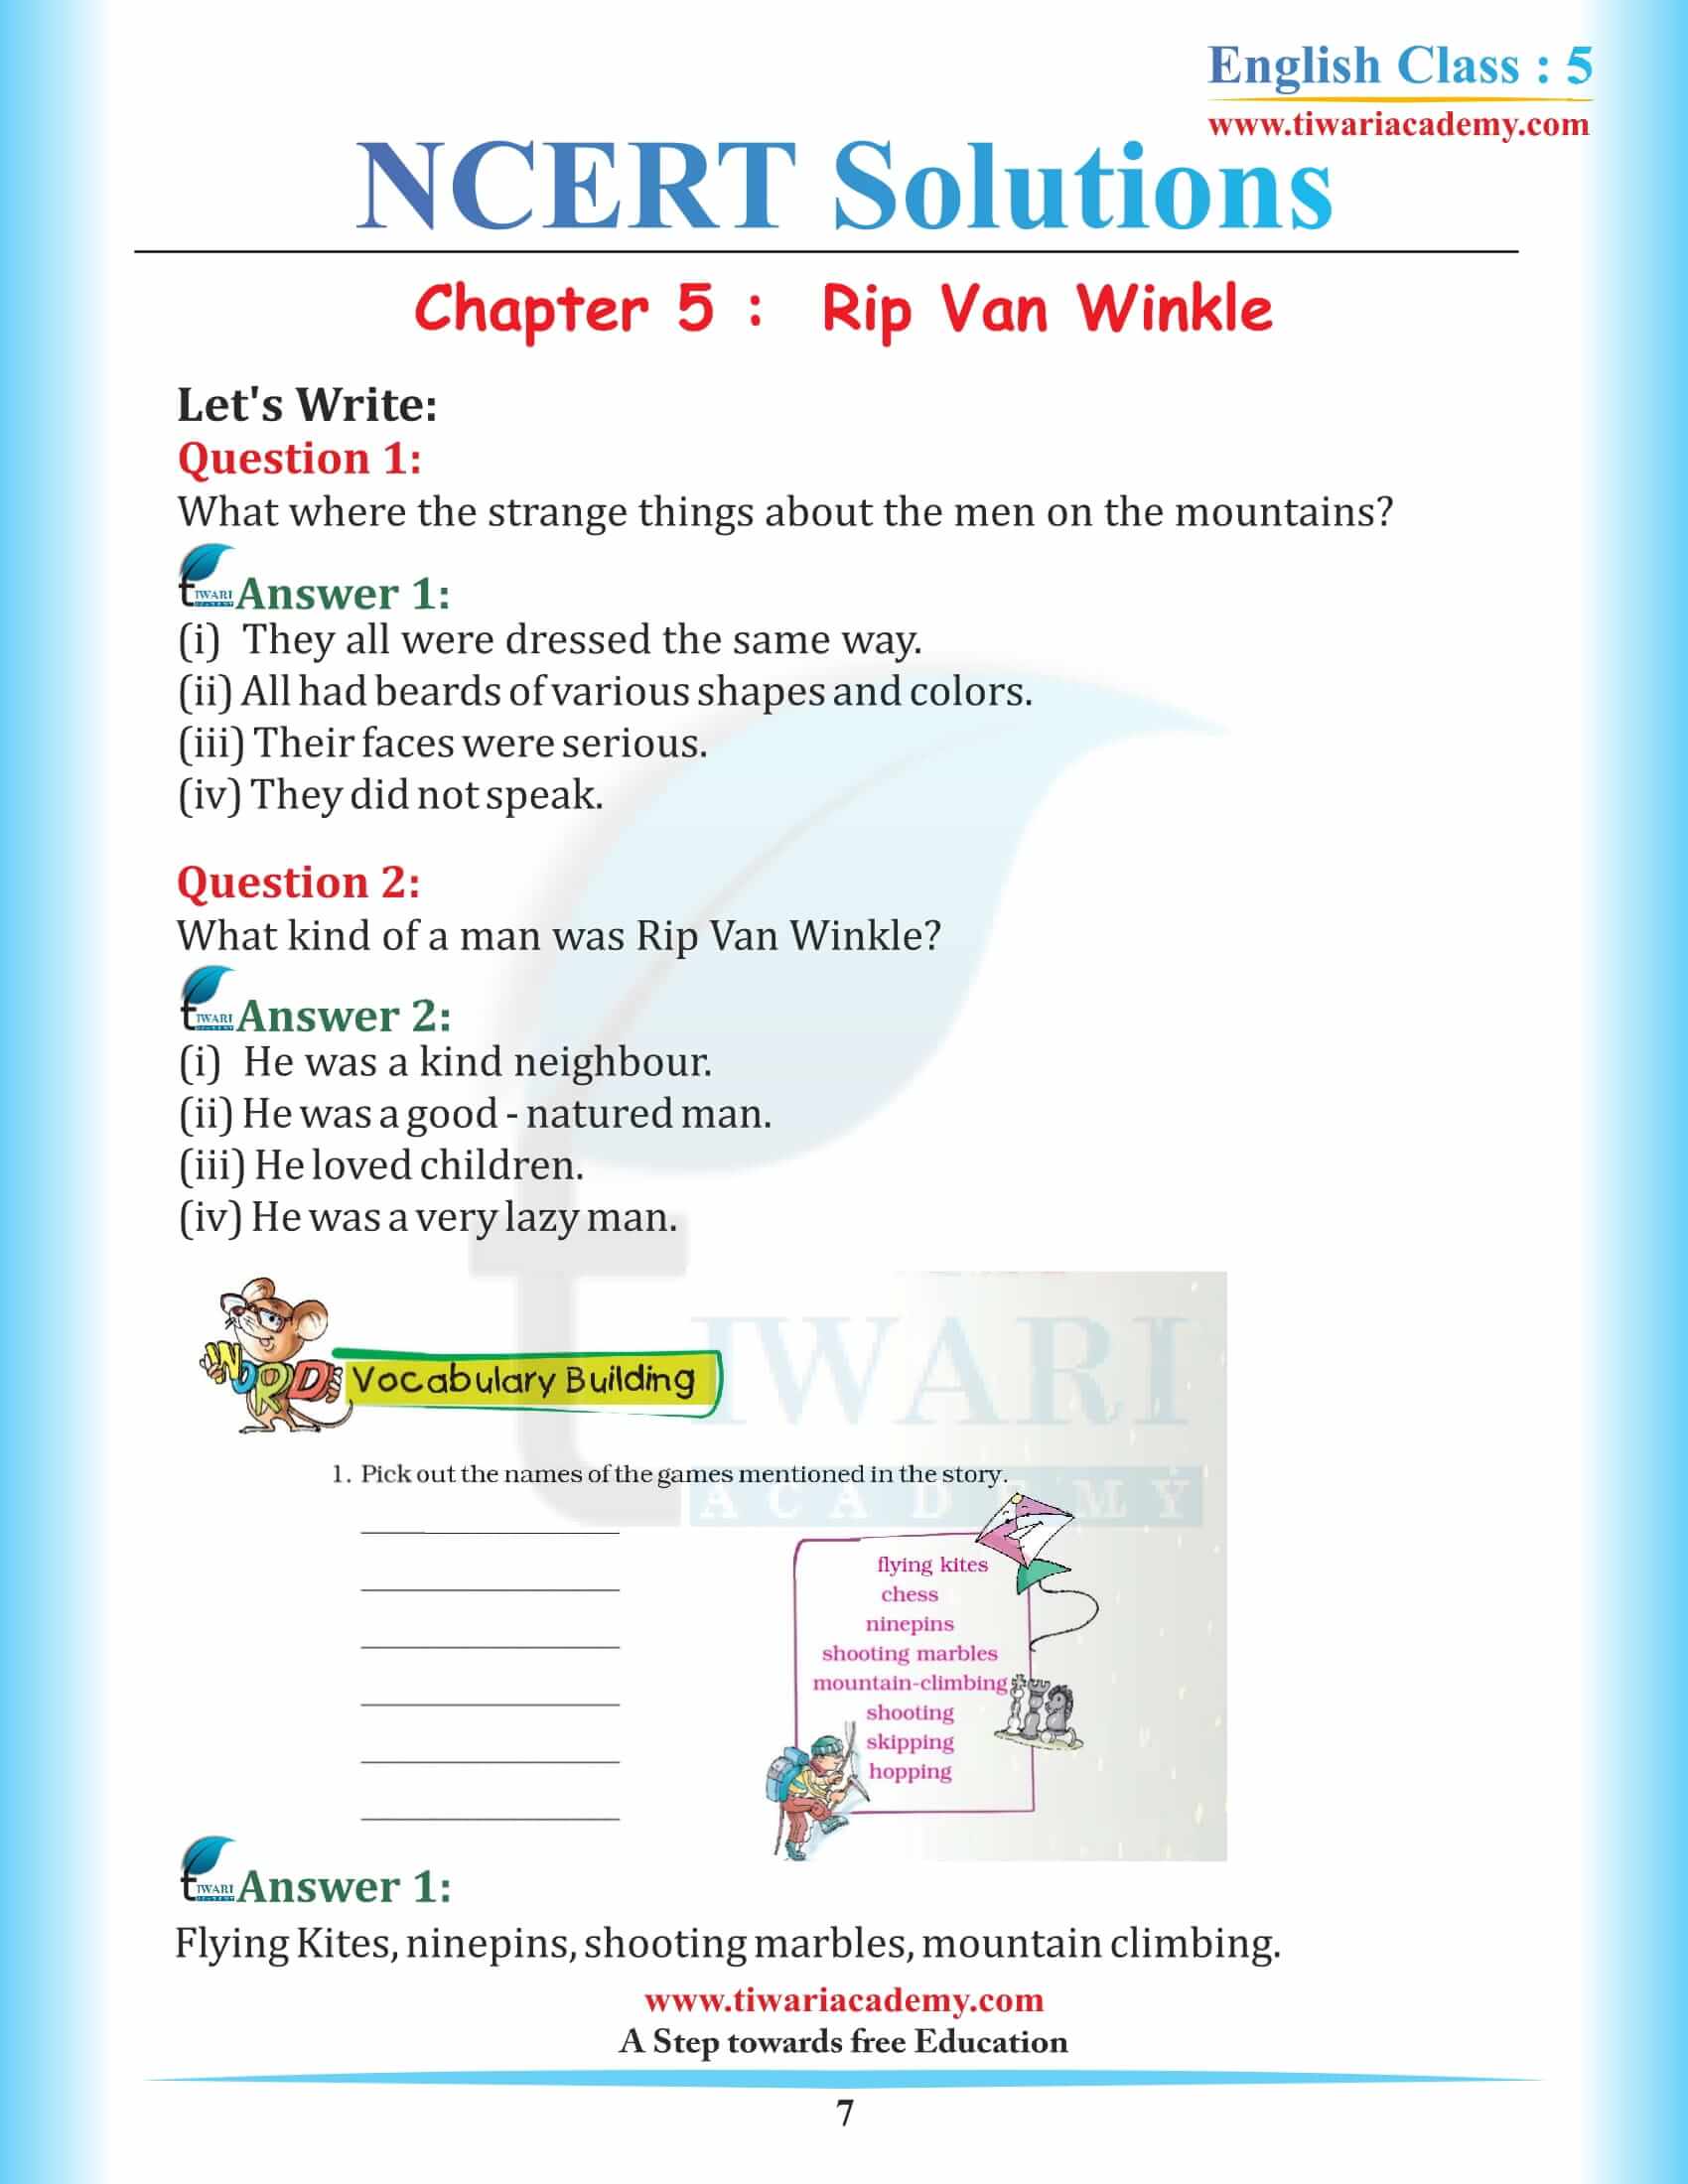 NCERT Solutions for Class 5 English Chapter 5 Rip Van Winkle in Hindi Medium